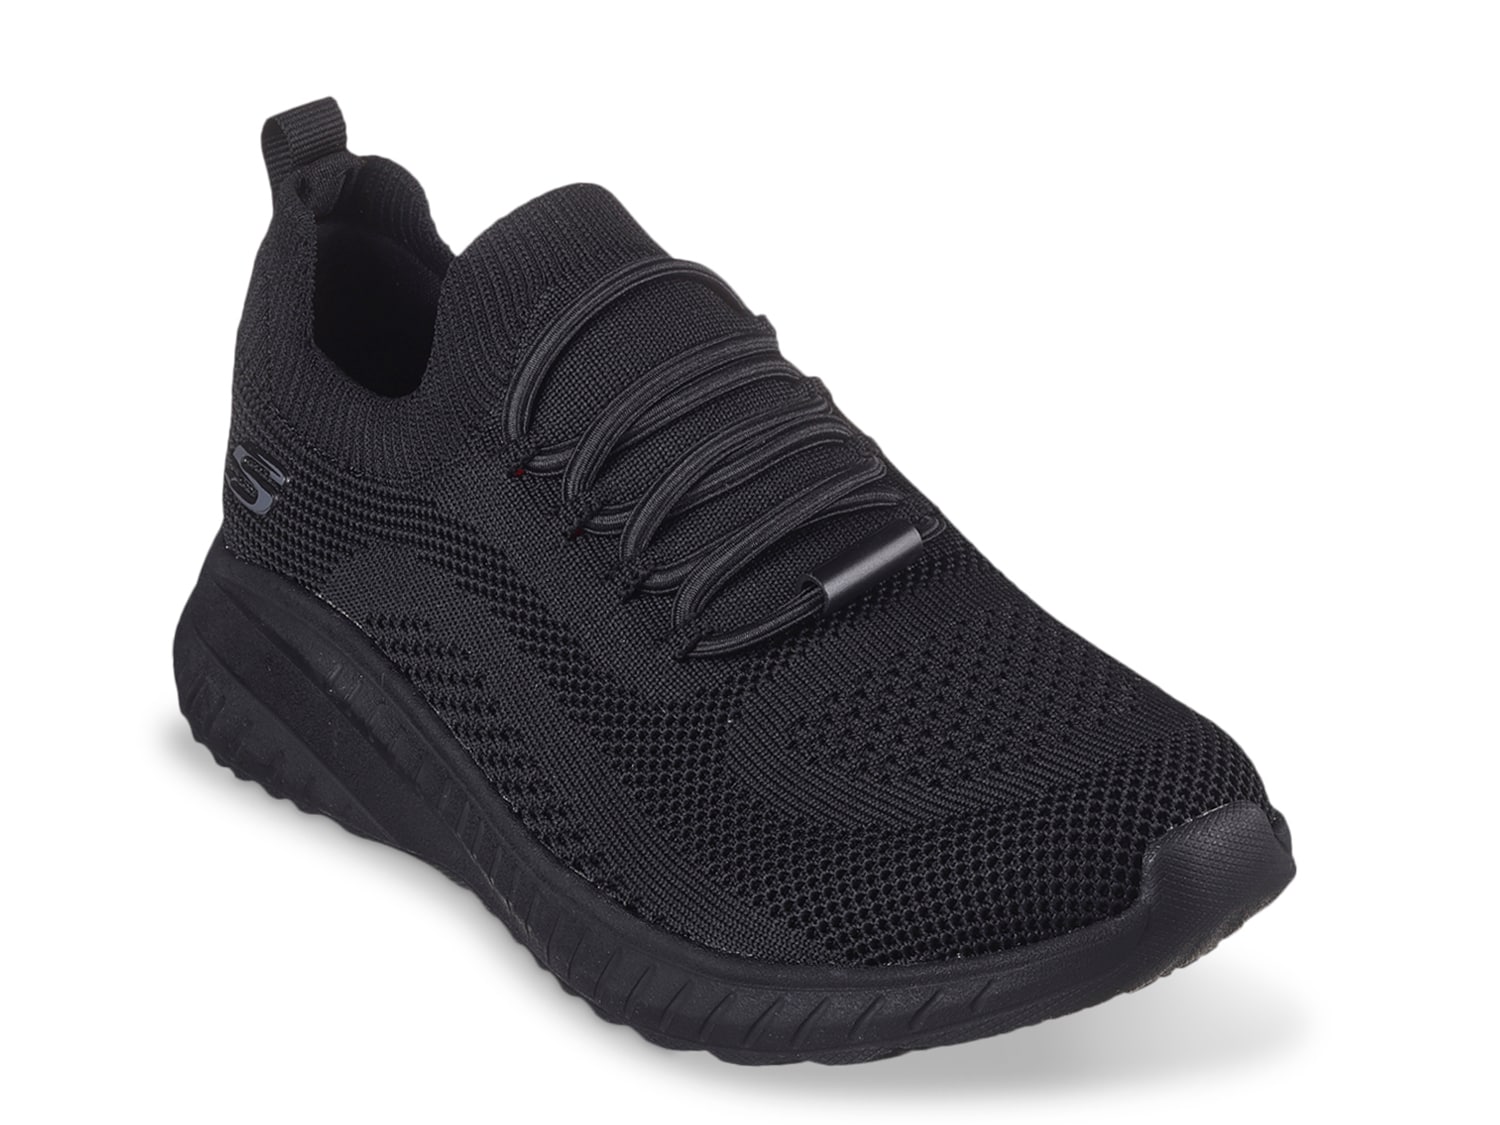 Кроссовки-слипоны женские Skechers Bobs Relaxed Fit Sport Squad Chaos SR, черный кроссовки skechers sport bobs squad olive reflective